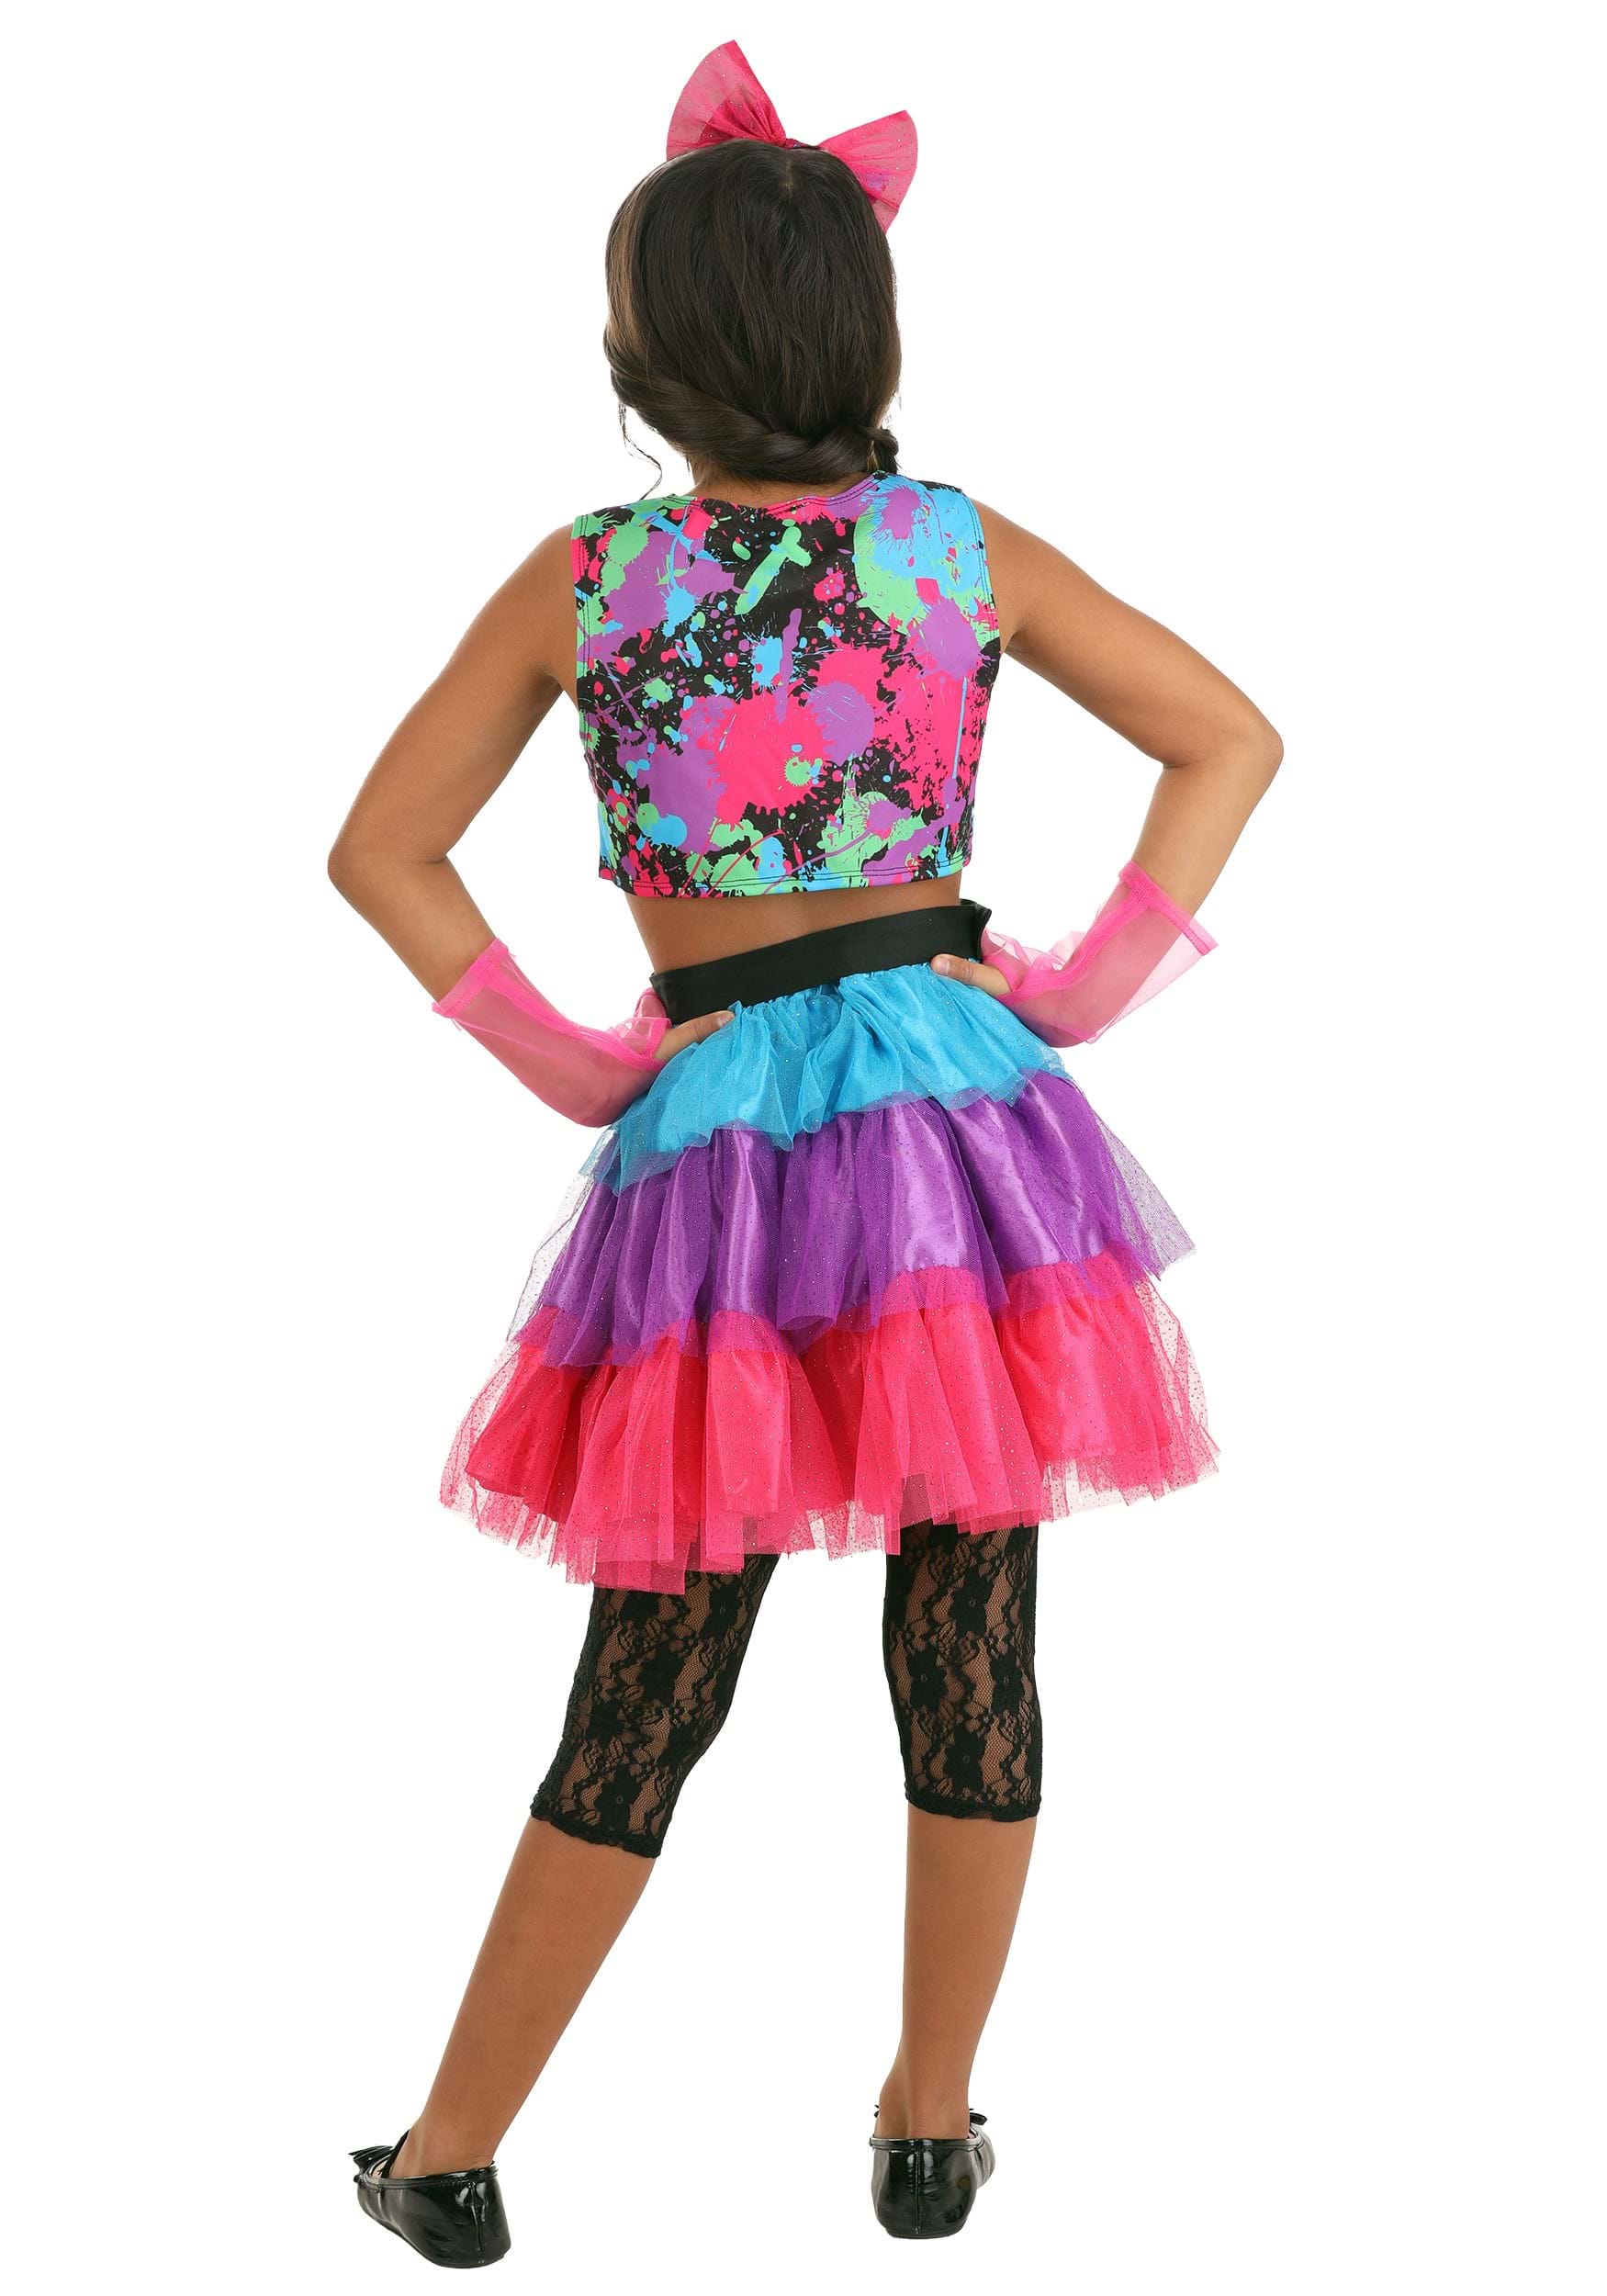 Adult 1980s Neon Paint Spatter Muscle Pants, Multi-Coloured, Costume  Accessory for Halloween